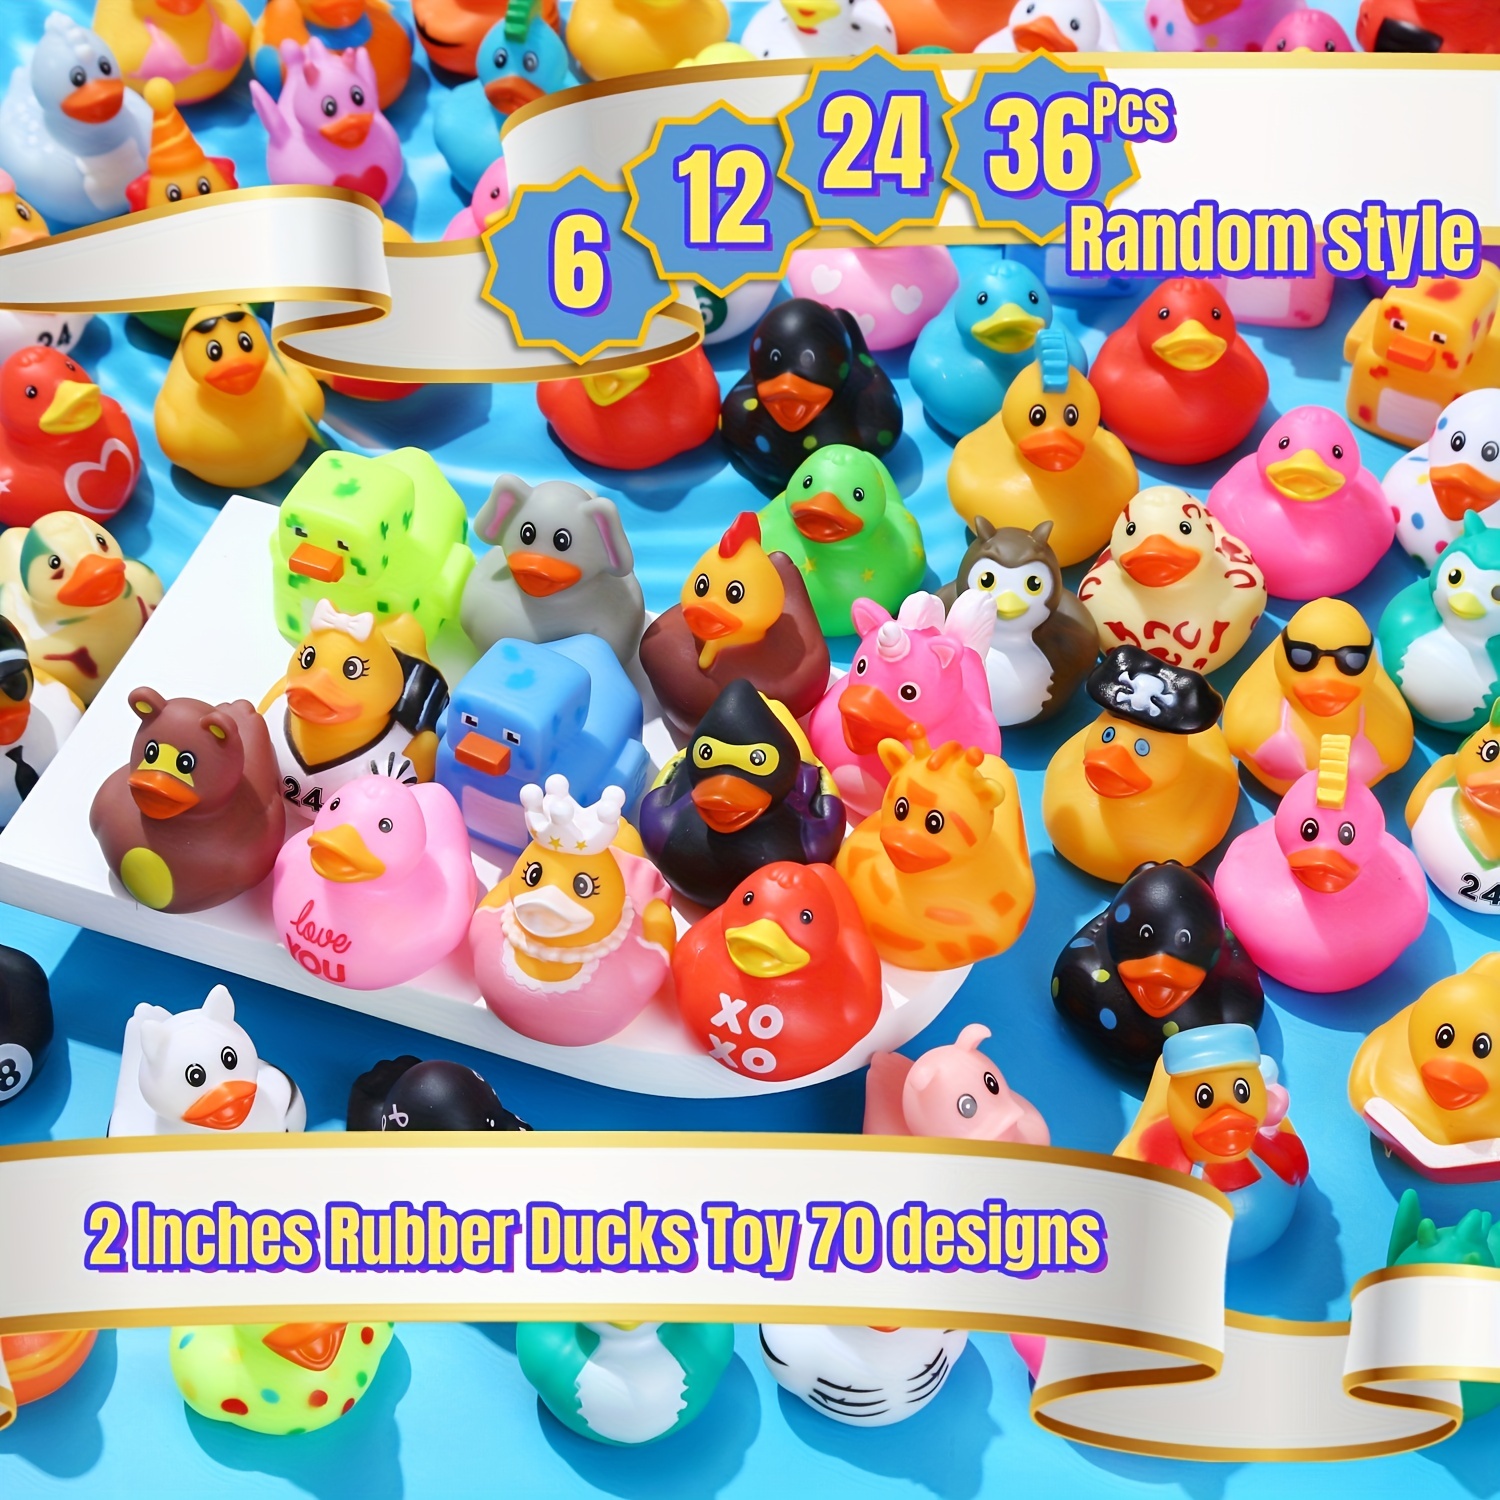  48 Pcs Mini Rubber Ducks Bath Duck with 48 Sunglasses Toy Sets,  Christmas Rubber Duck in Bulk Bath Toy Bathtub Toys for Gift Holiday Cruise  Birthday Christmas Party Favors (Yellow, Black) 